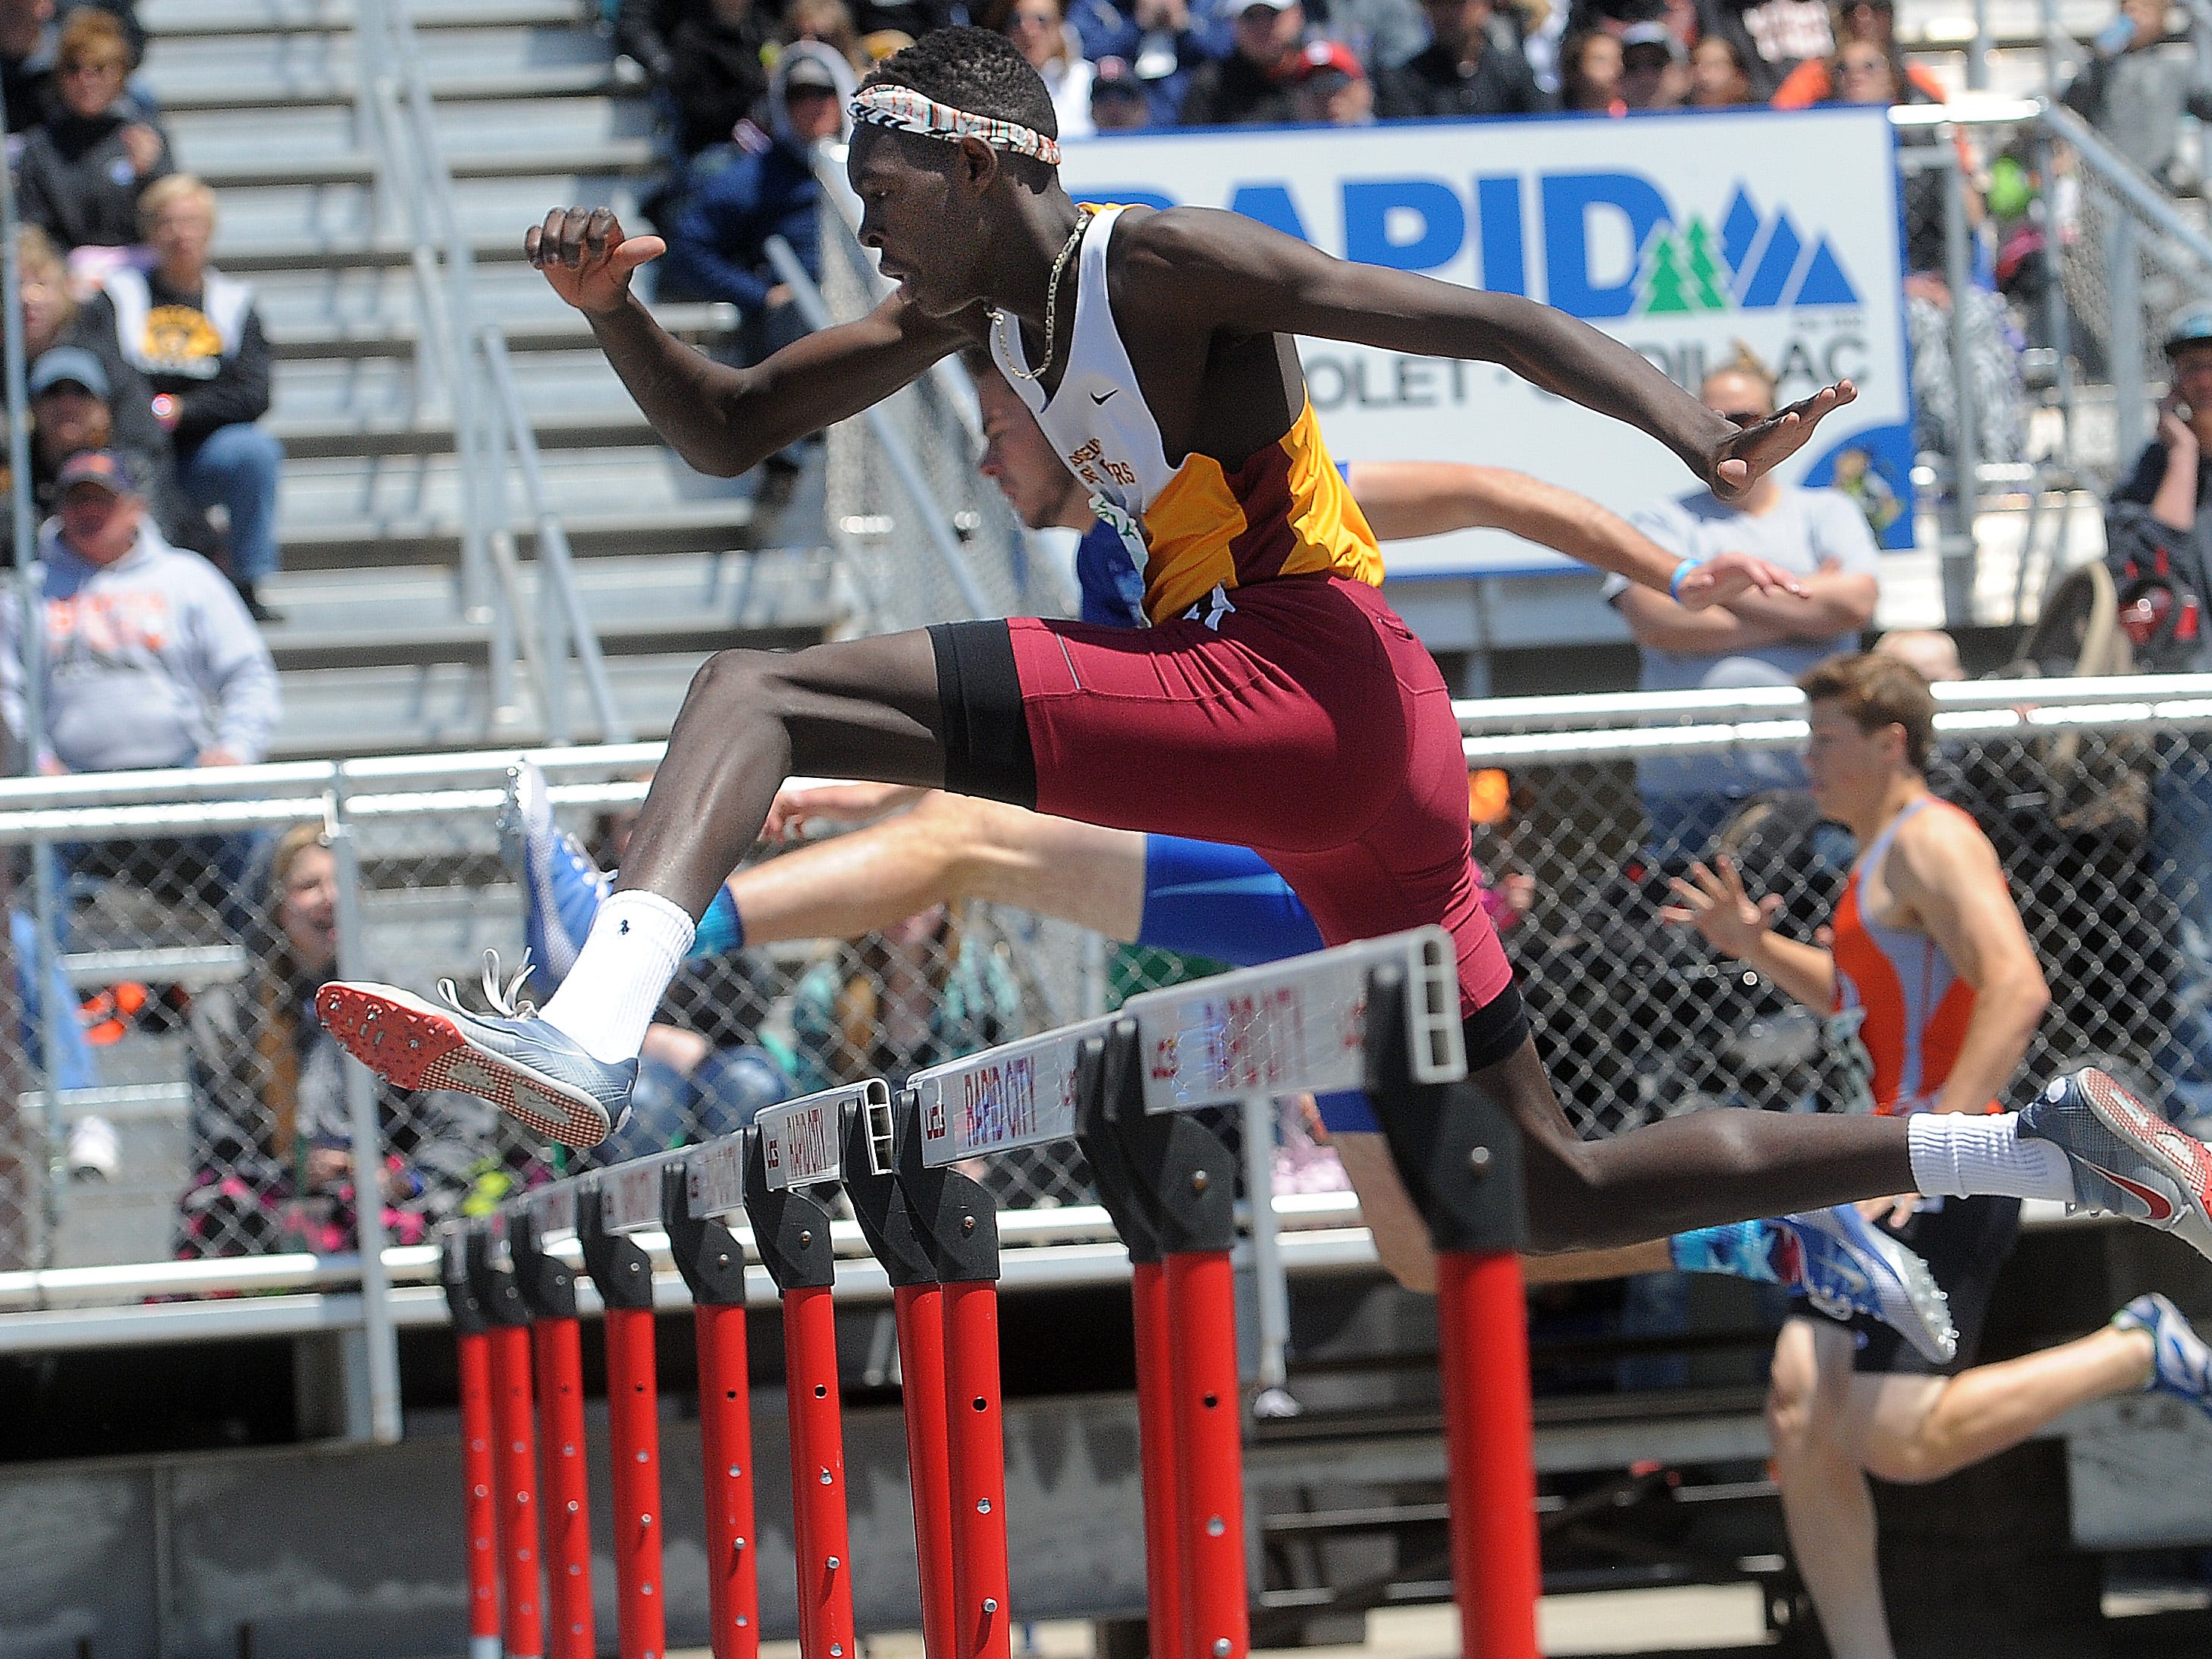 Roosevelt’s Mayuen Akok race to victory Saturday in Rapid City in the 300 hurdles. His time was 39.72 seconds. He later helped the Rough Riders to a win in the 800 relay.